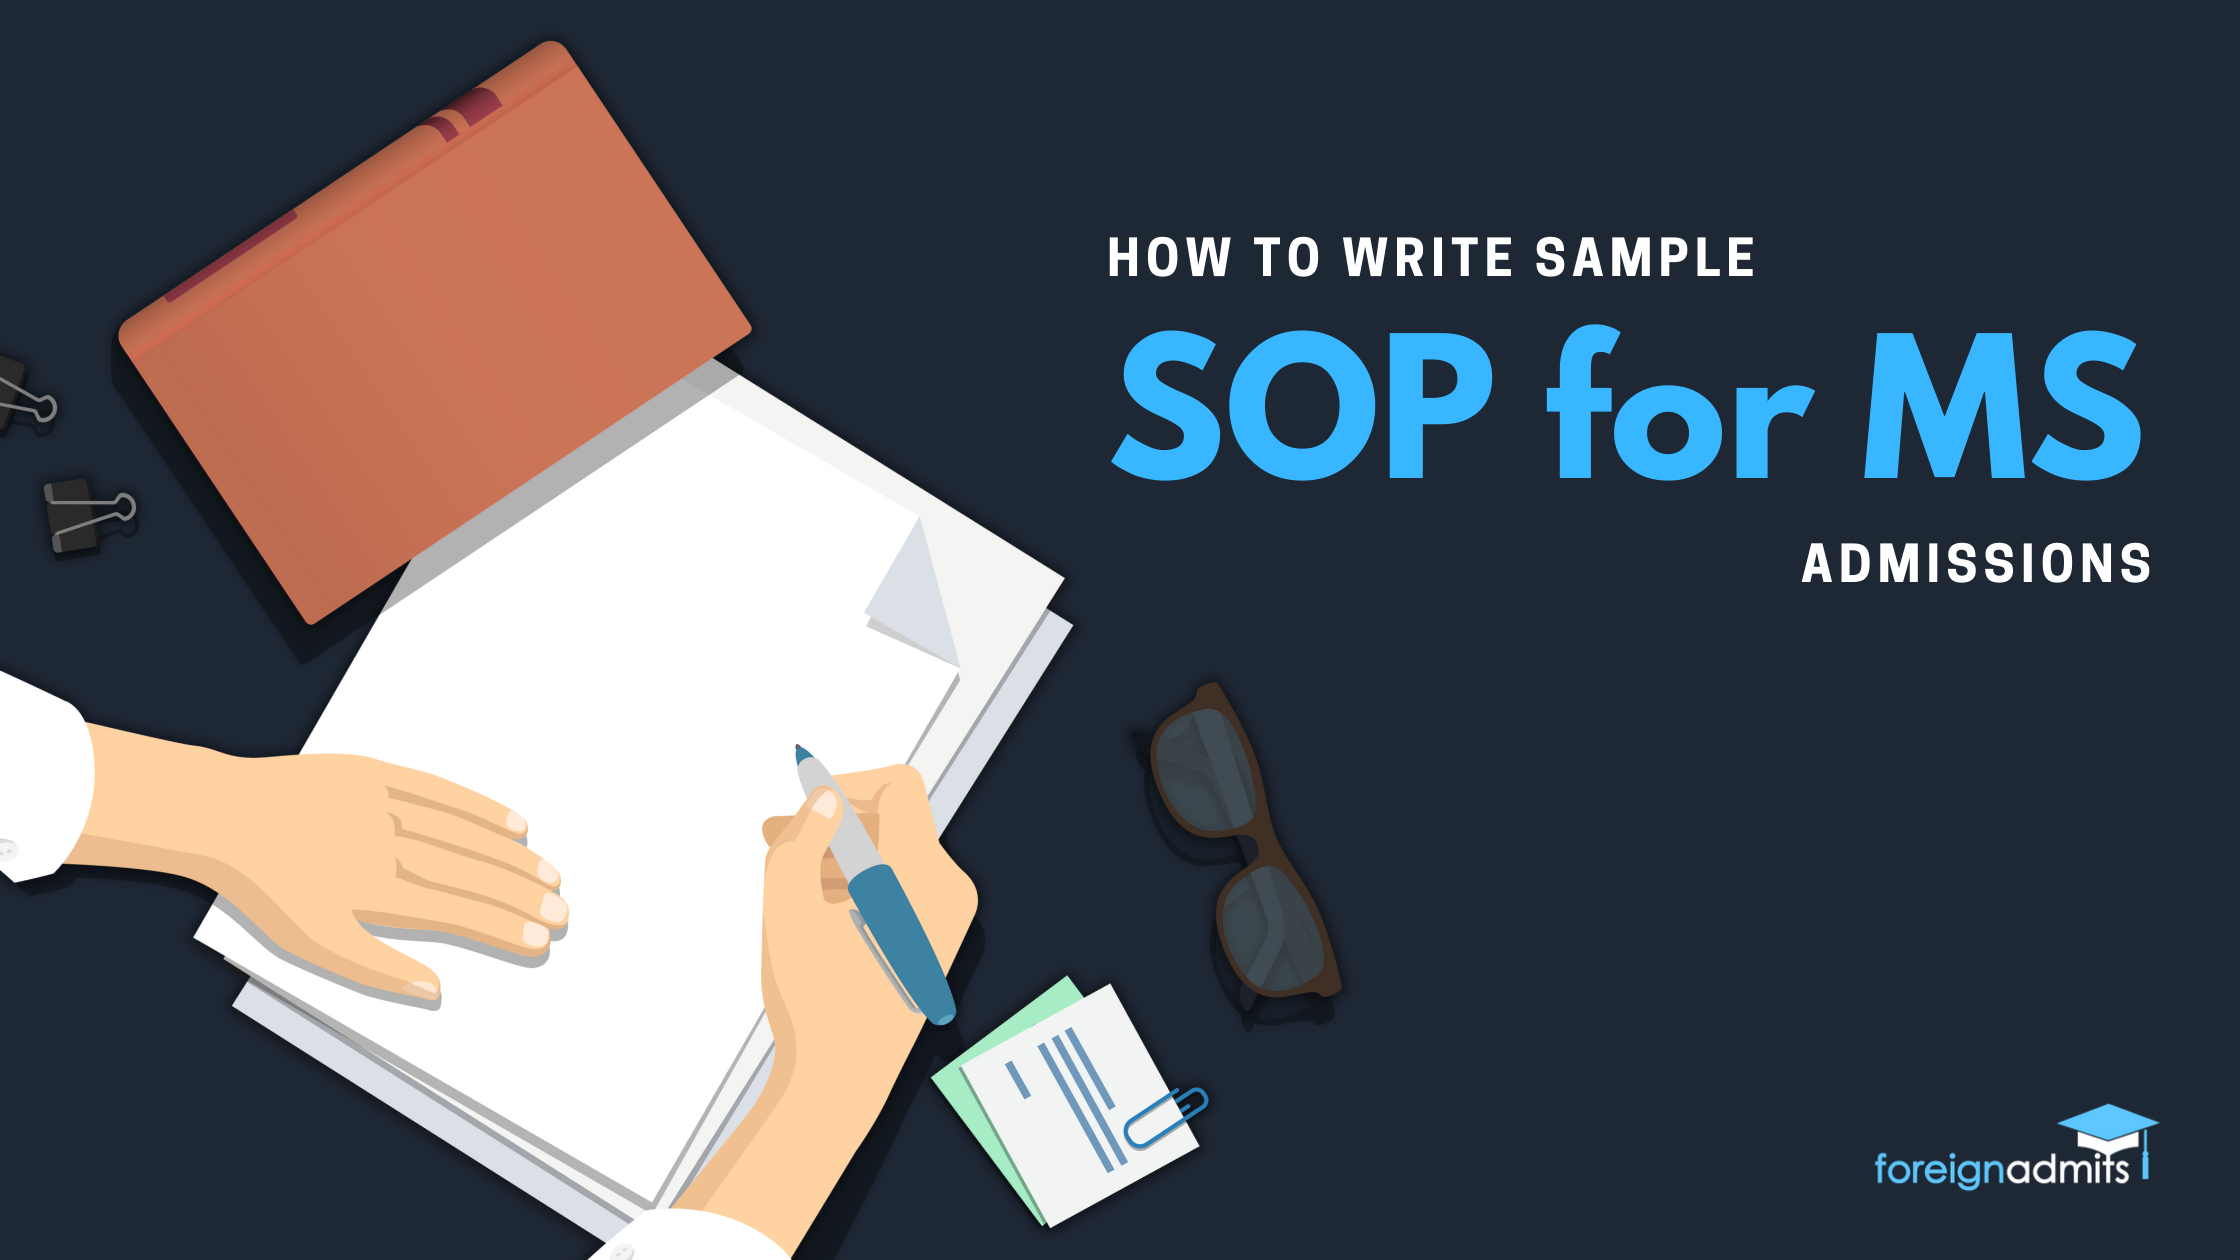 How to write a sample SOP for MS admissions?